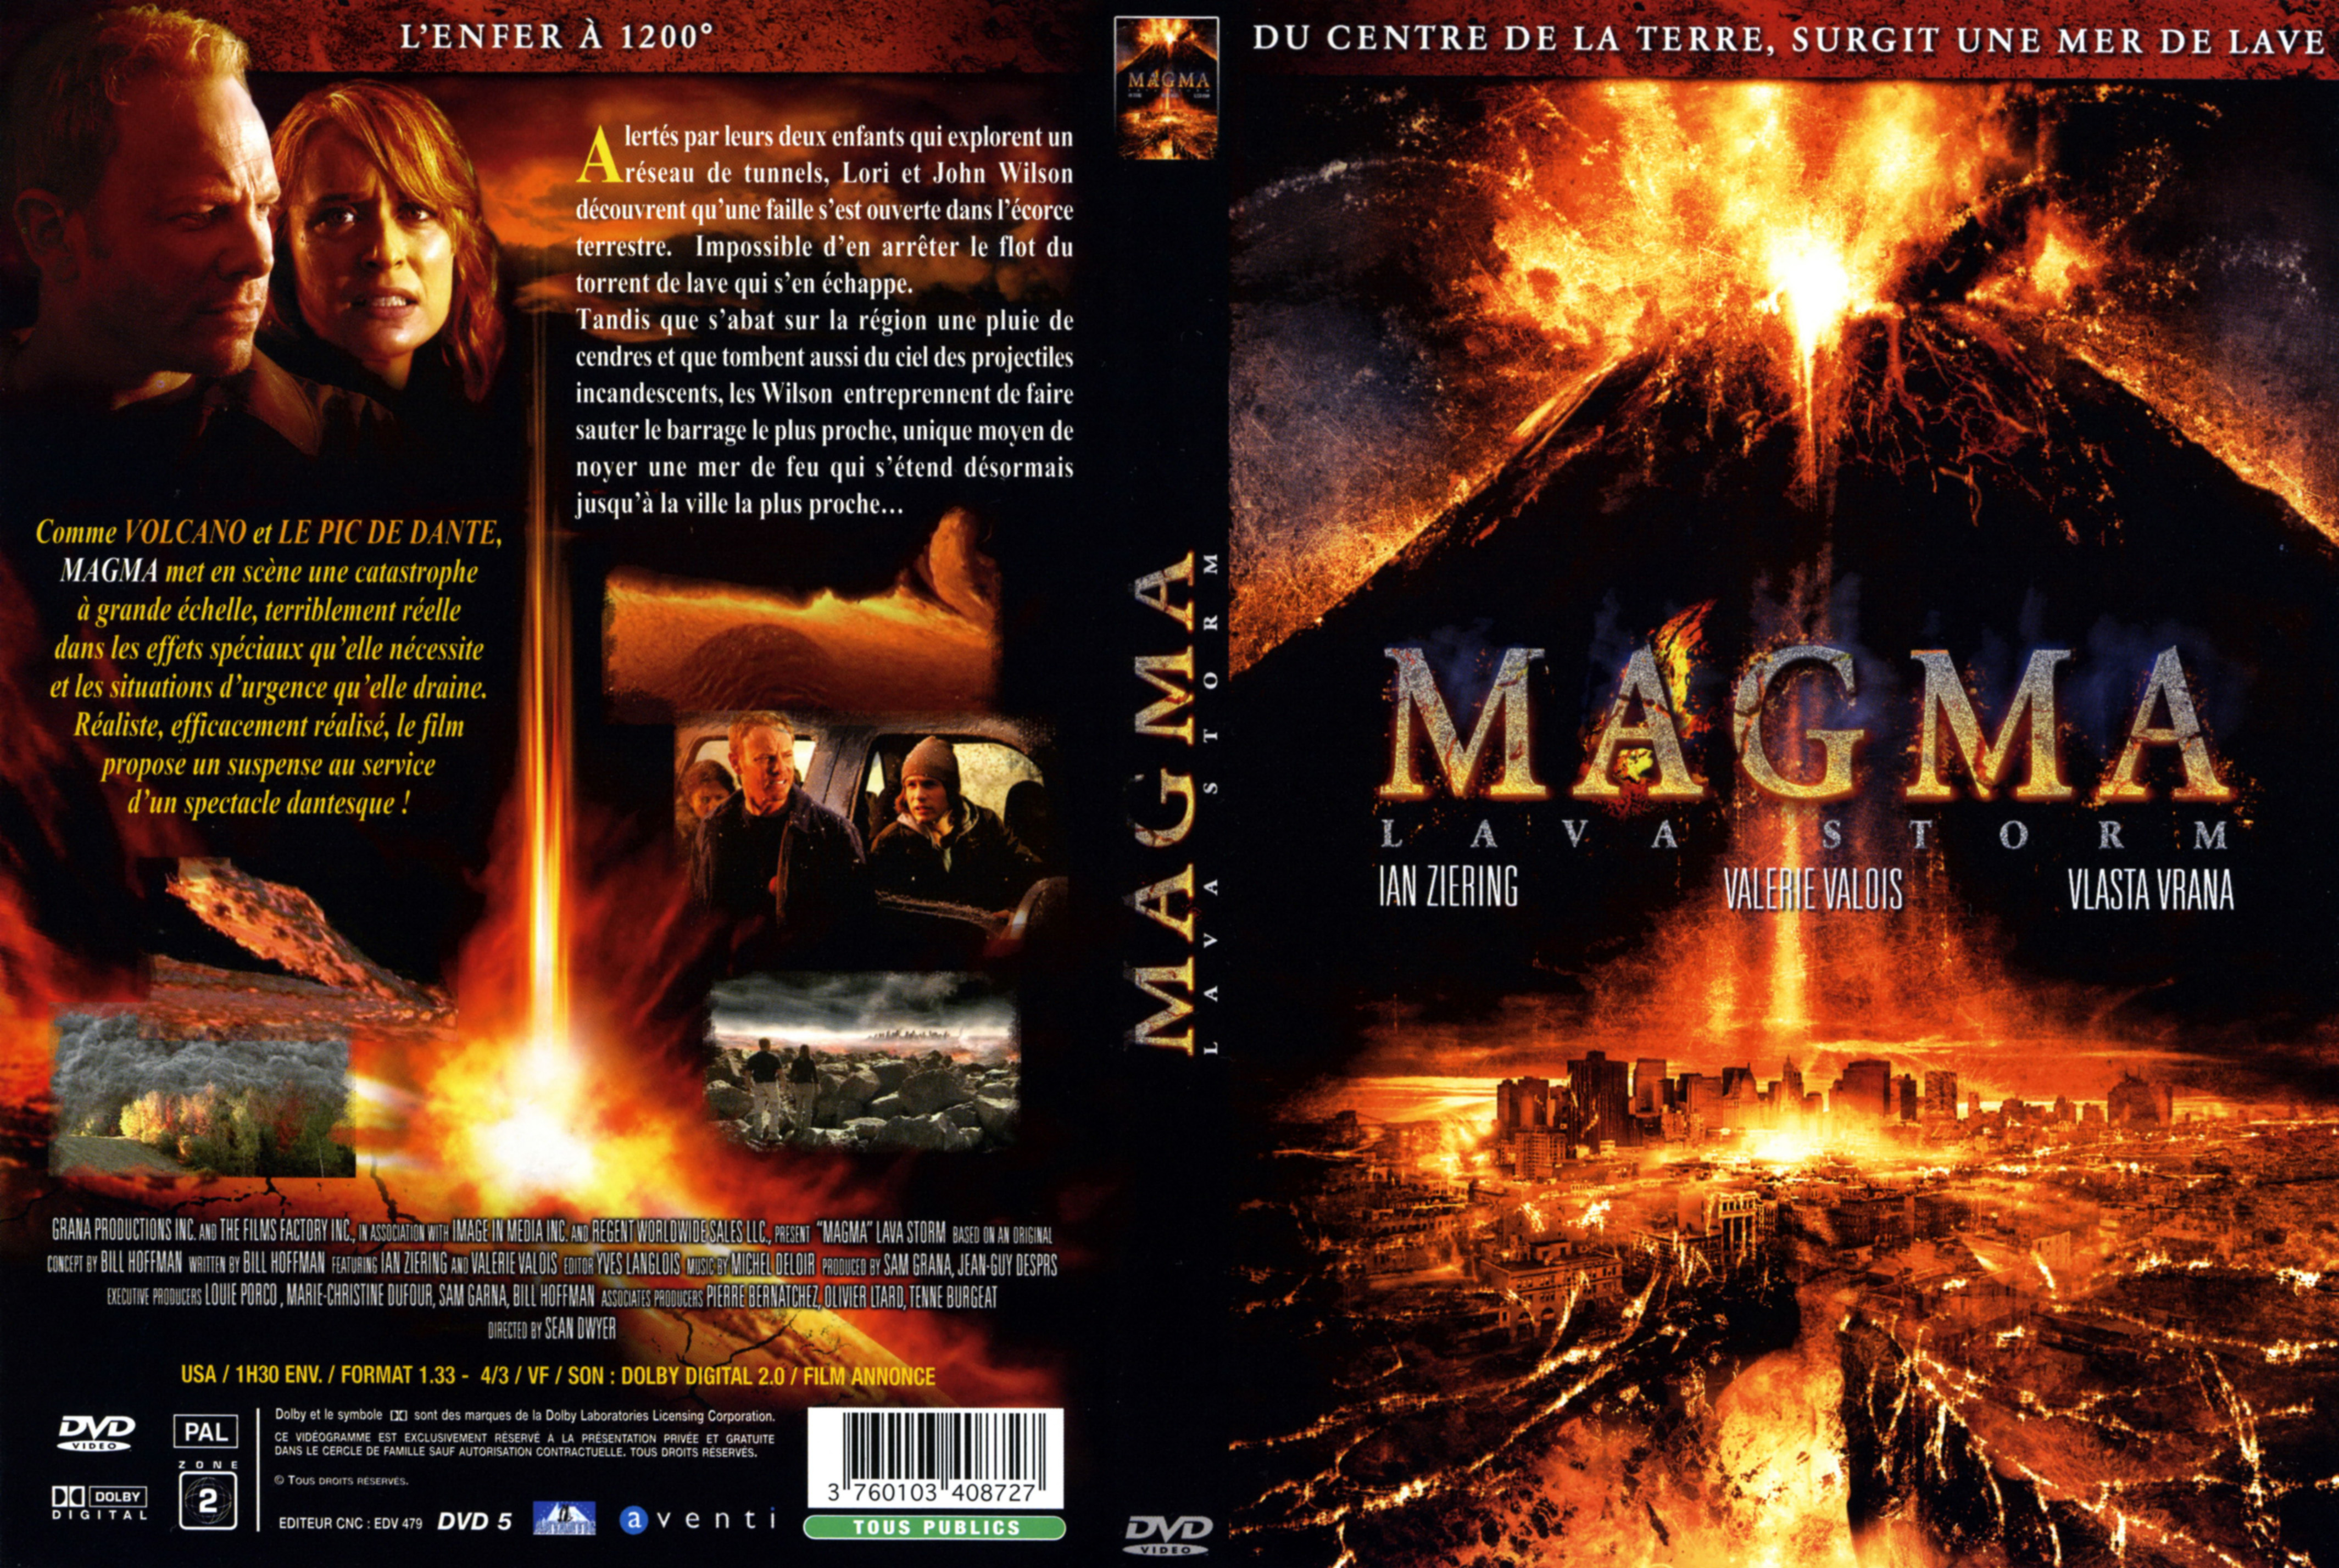 Jaquette DVD Magma